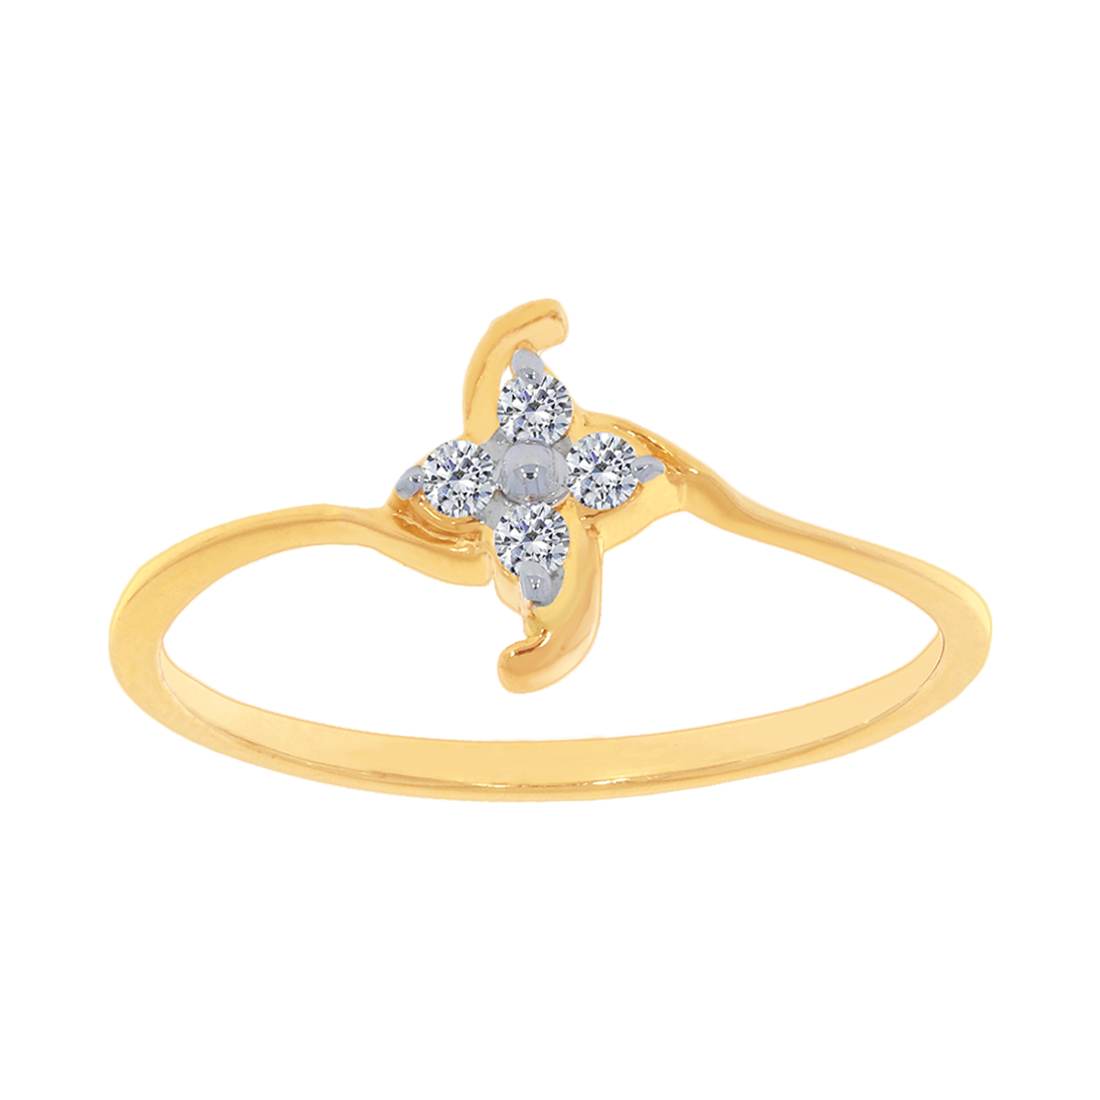 Kalyan Jewellers Ring Model With Price